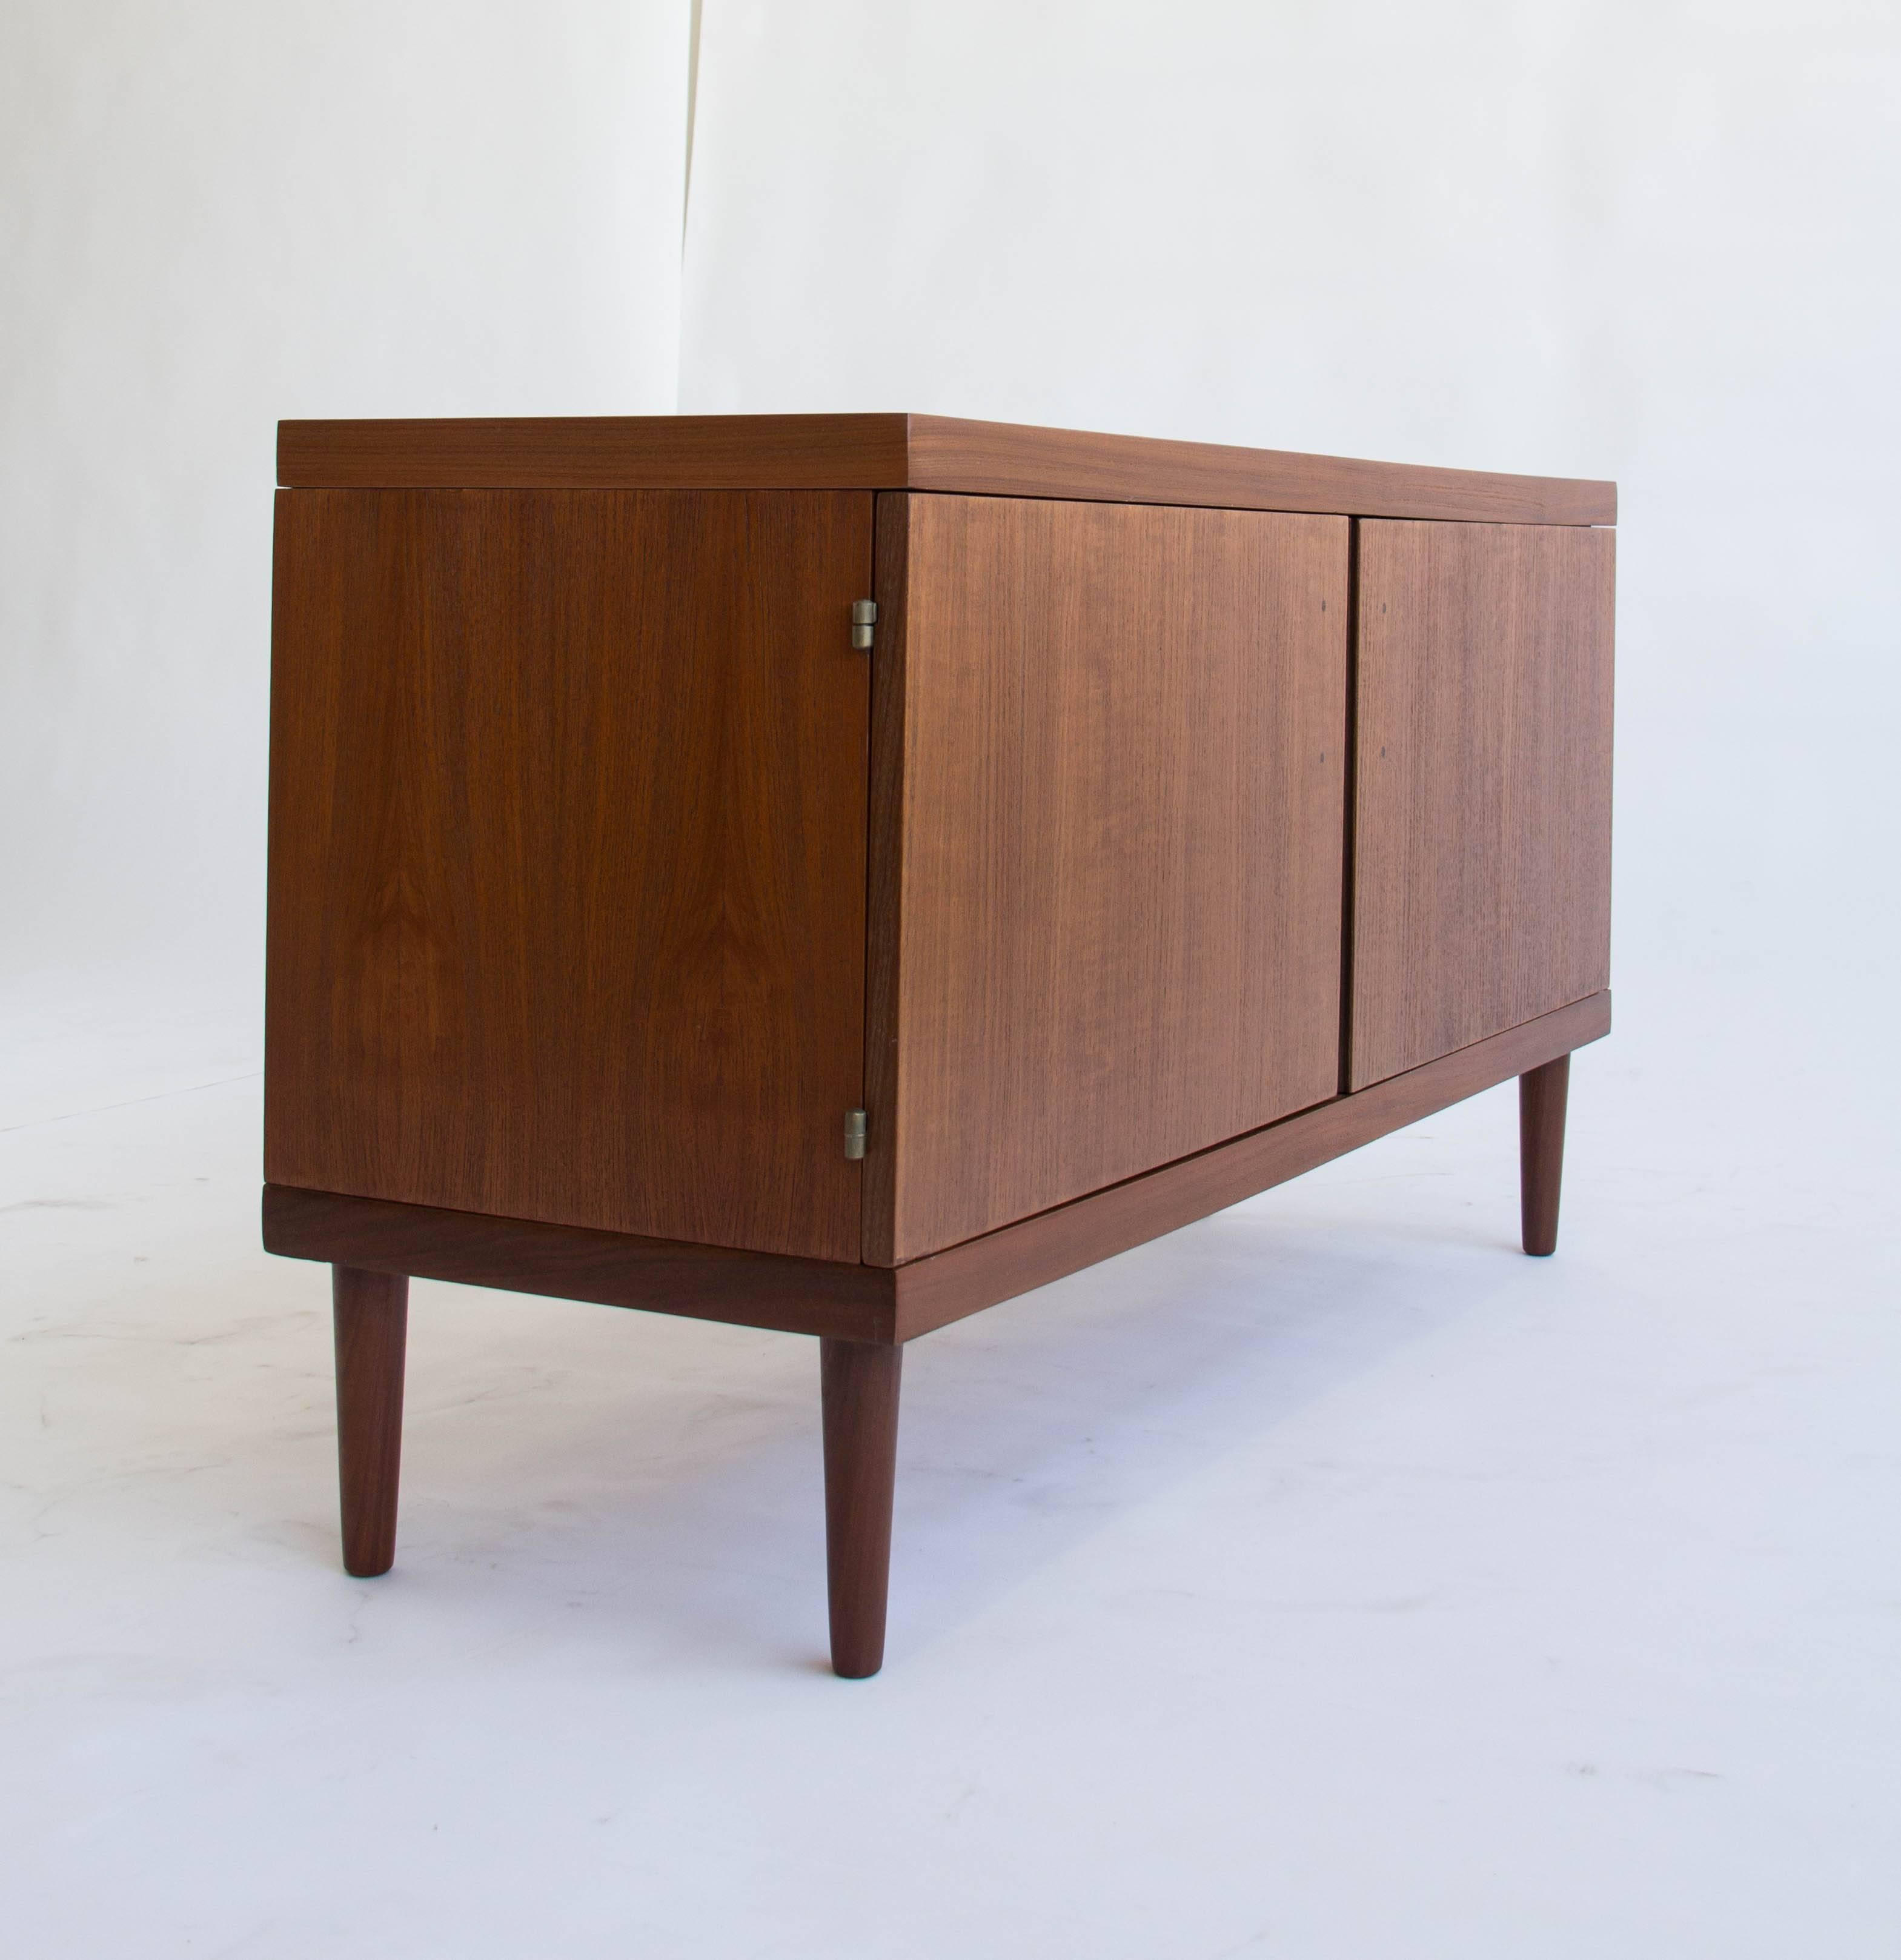 This a beautiful teak credenza in a Classic design by Hans Olsen. The modestly sized piece features two doors that swing open with sculpted door pulls. The interior is divided into two compartments, each with an adjustable shelf in beech wood.